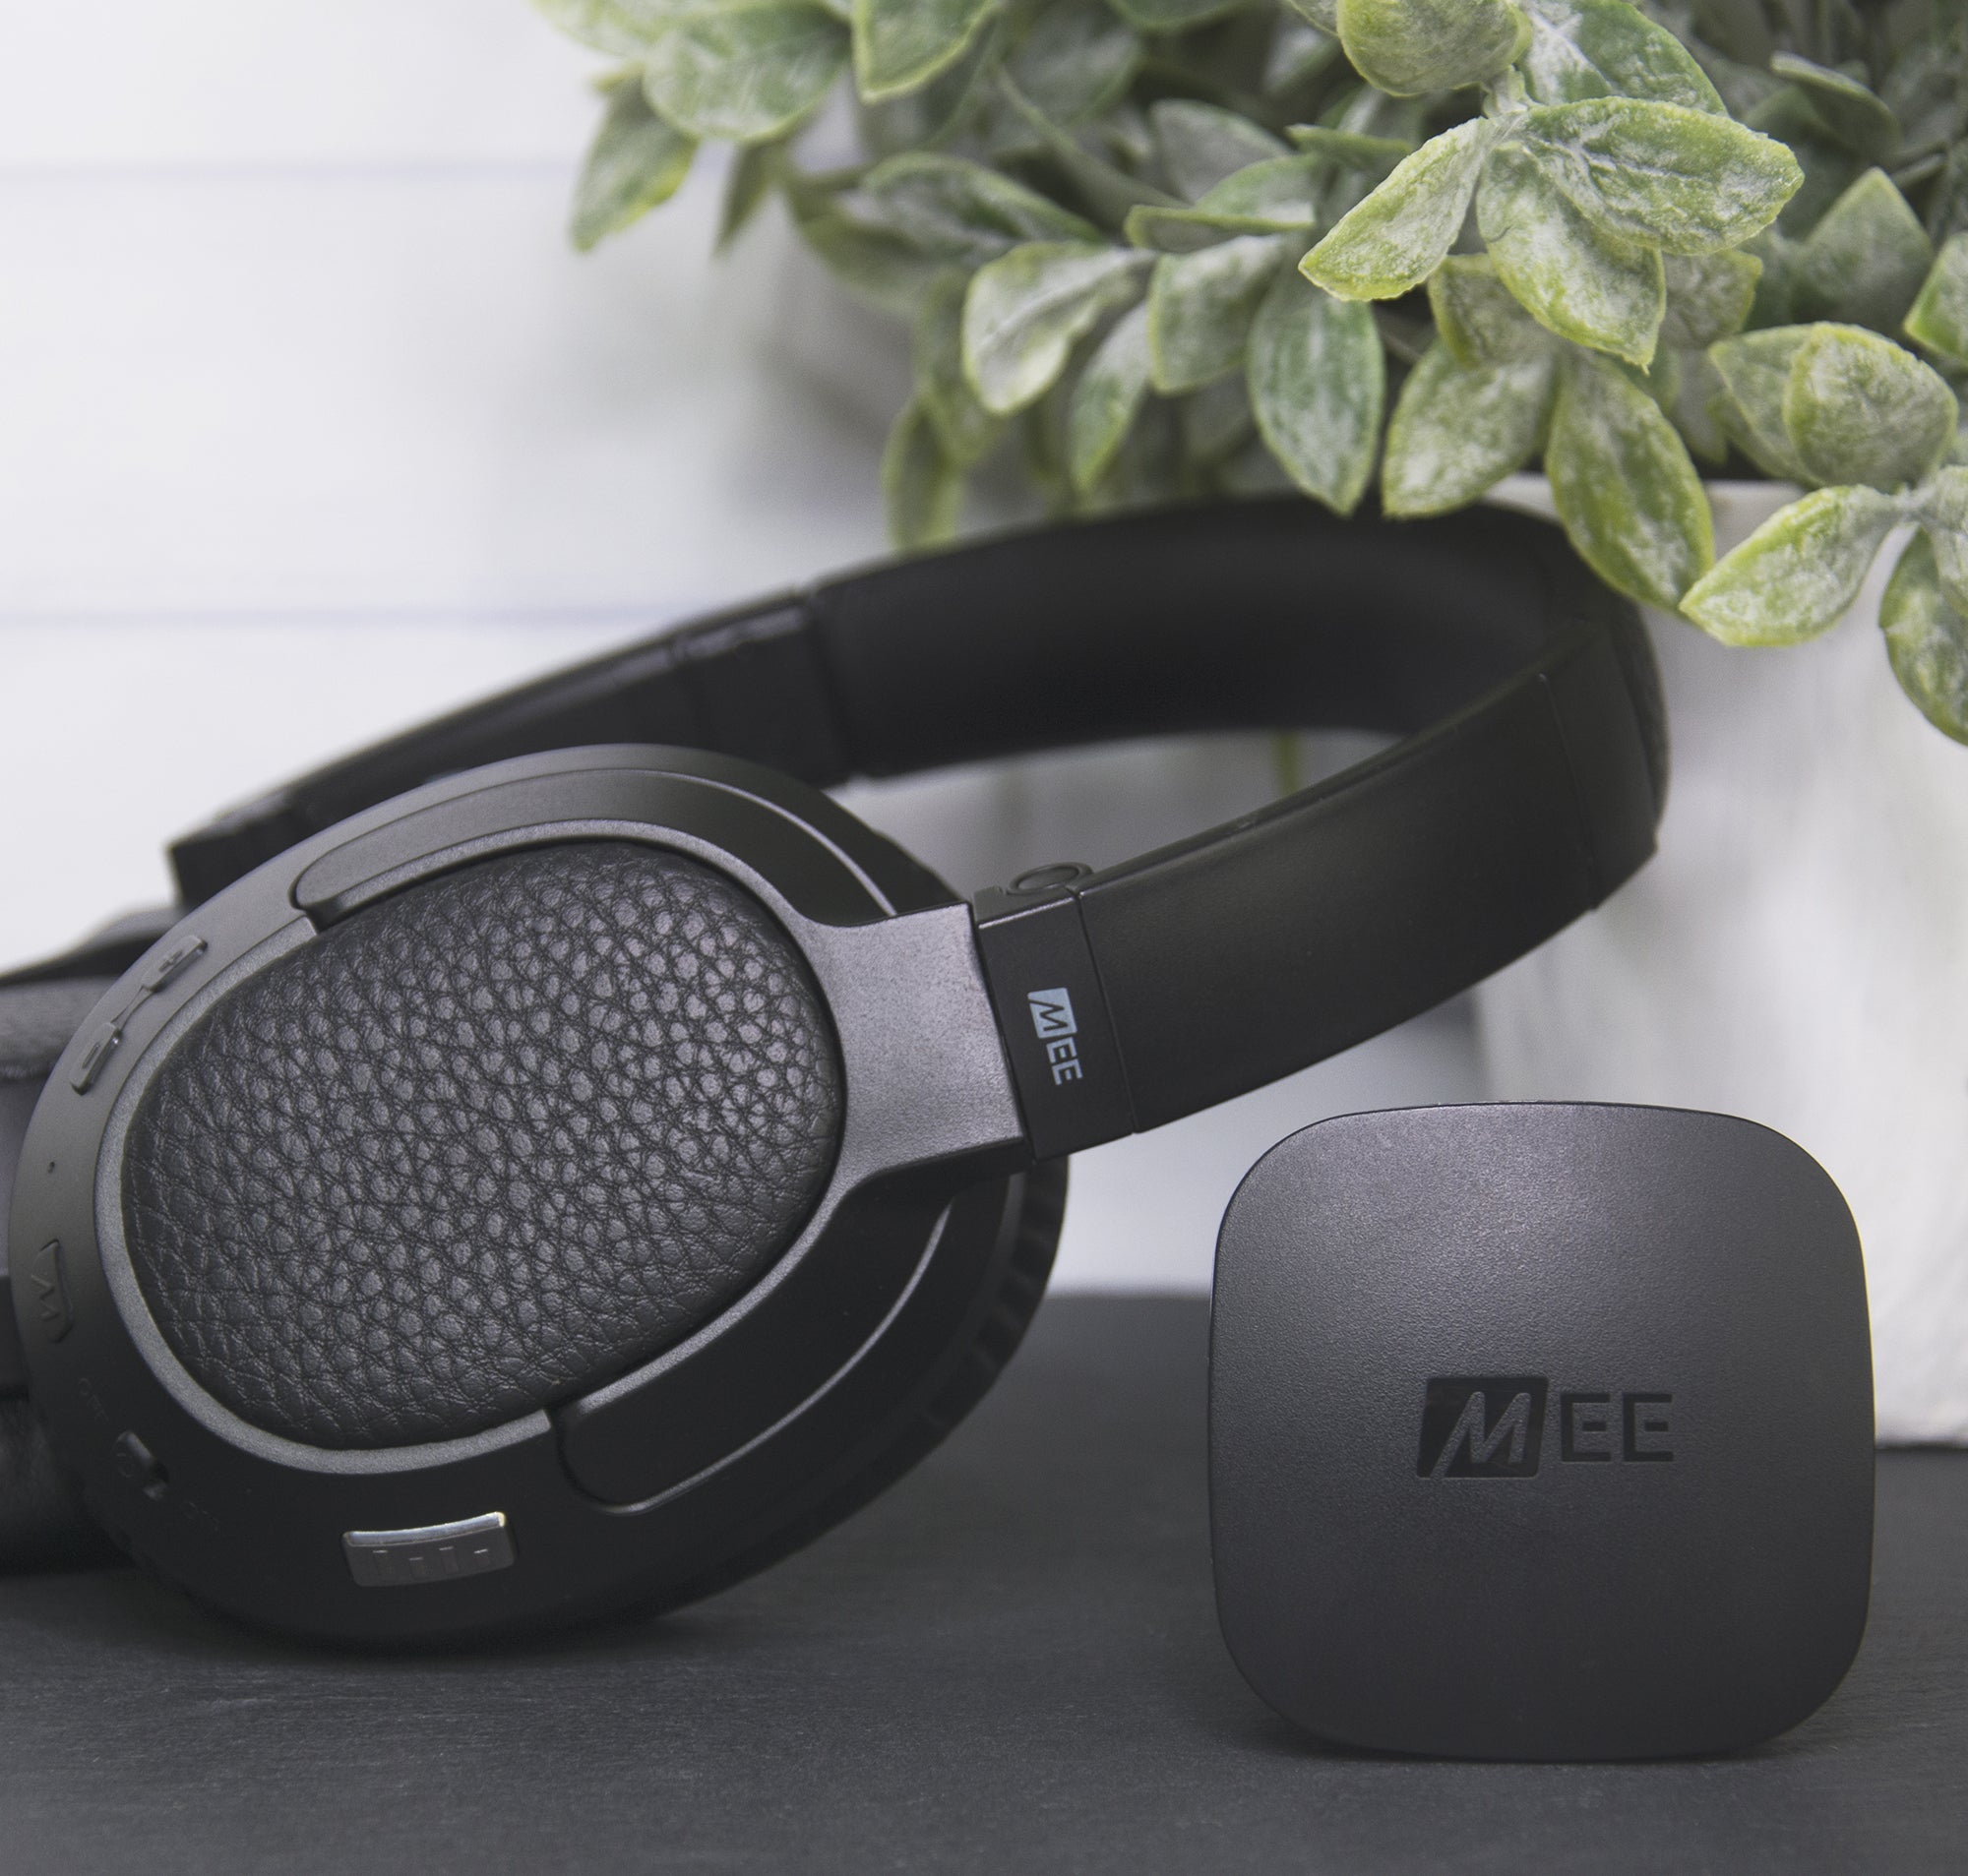 Black over-ear headphones with textured ear cups next to a small square wireless transmitter, both branded with "mee". positioned on a table beside a potted plant with green and white leaves, against a white wooden background.